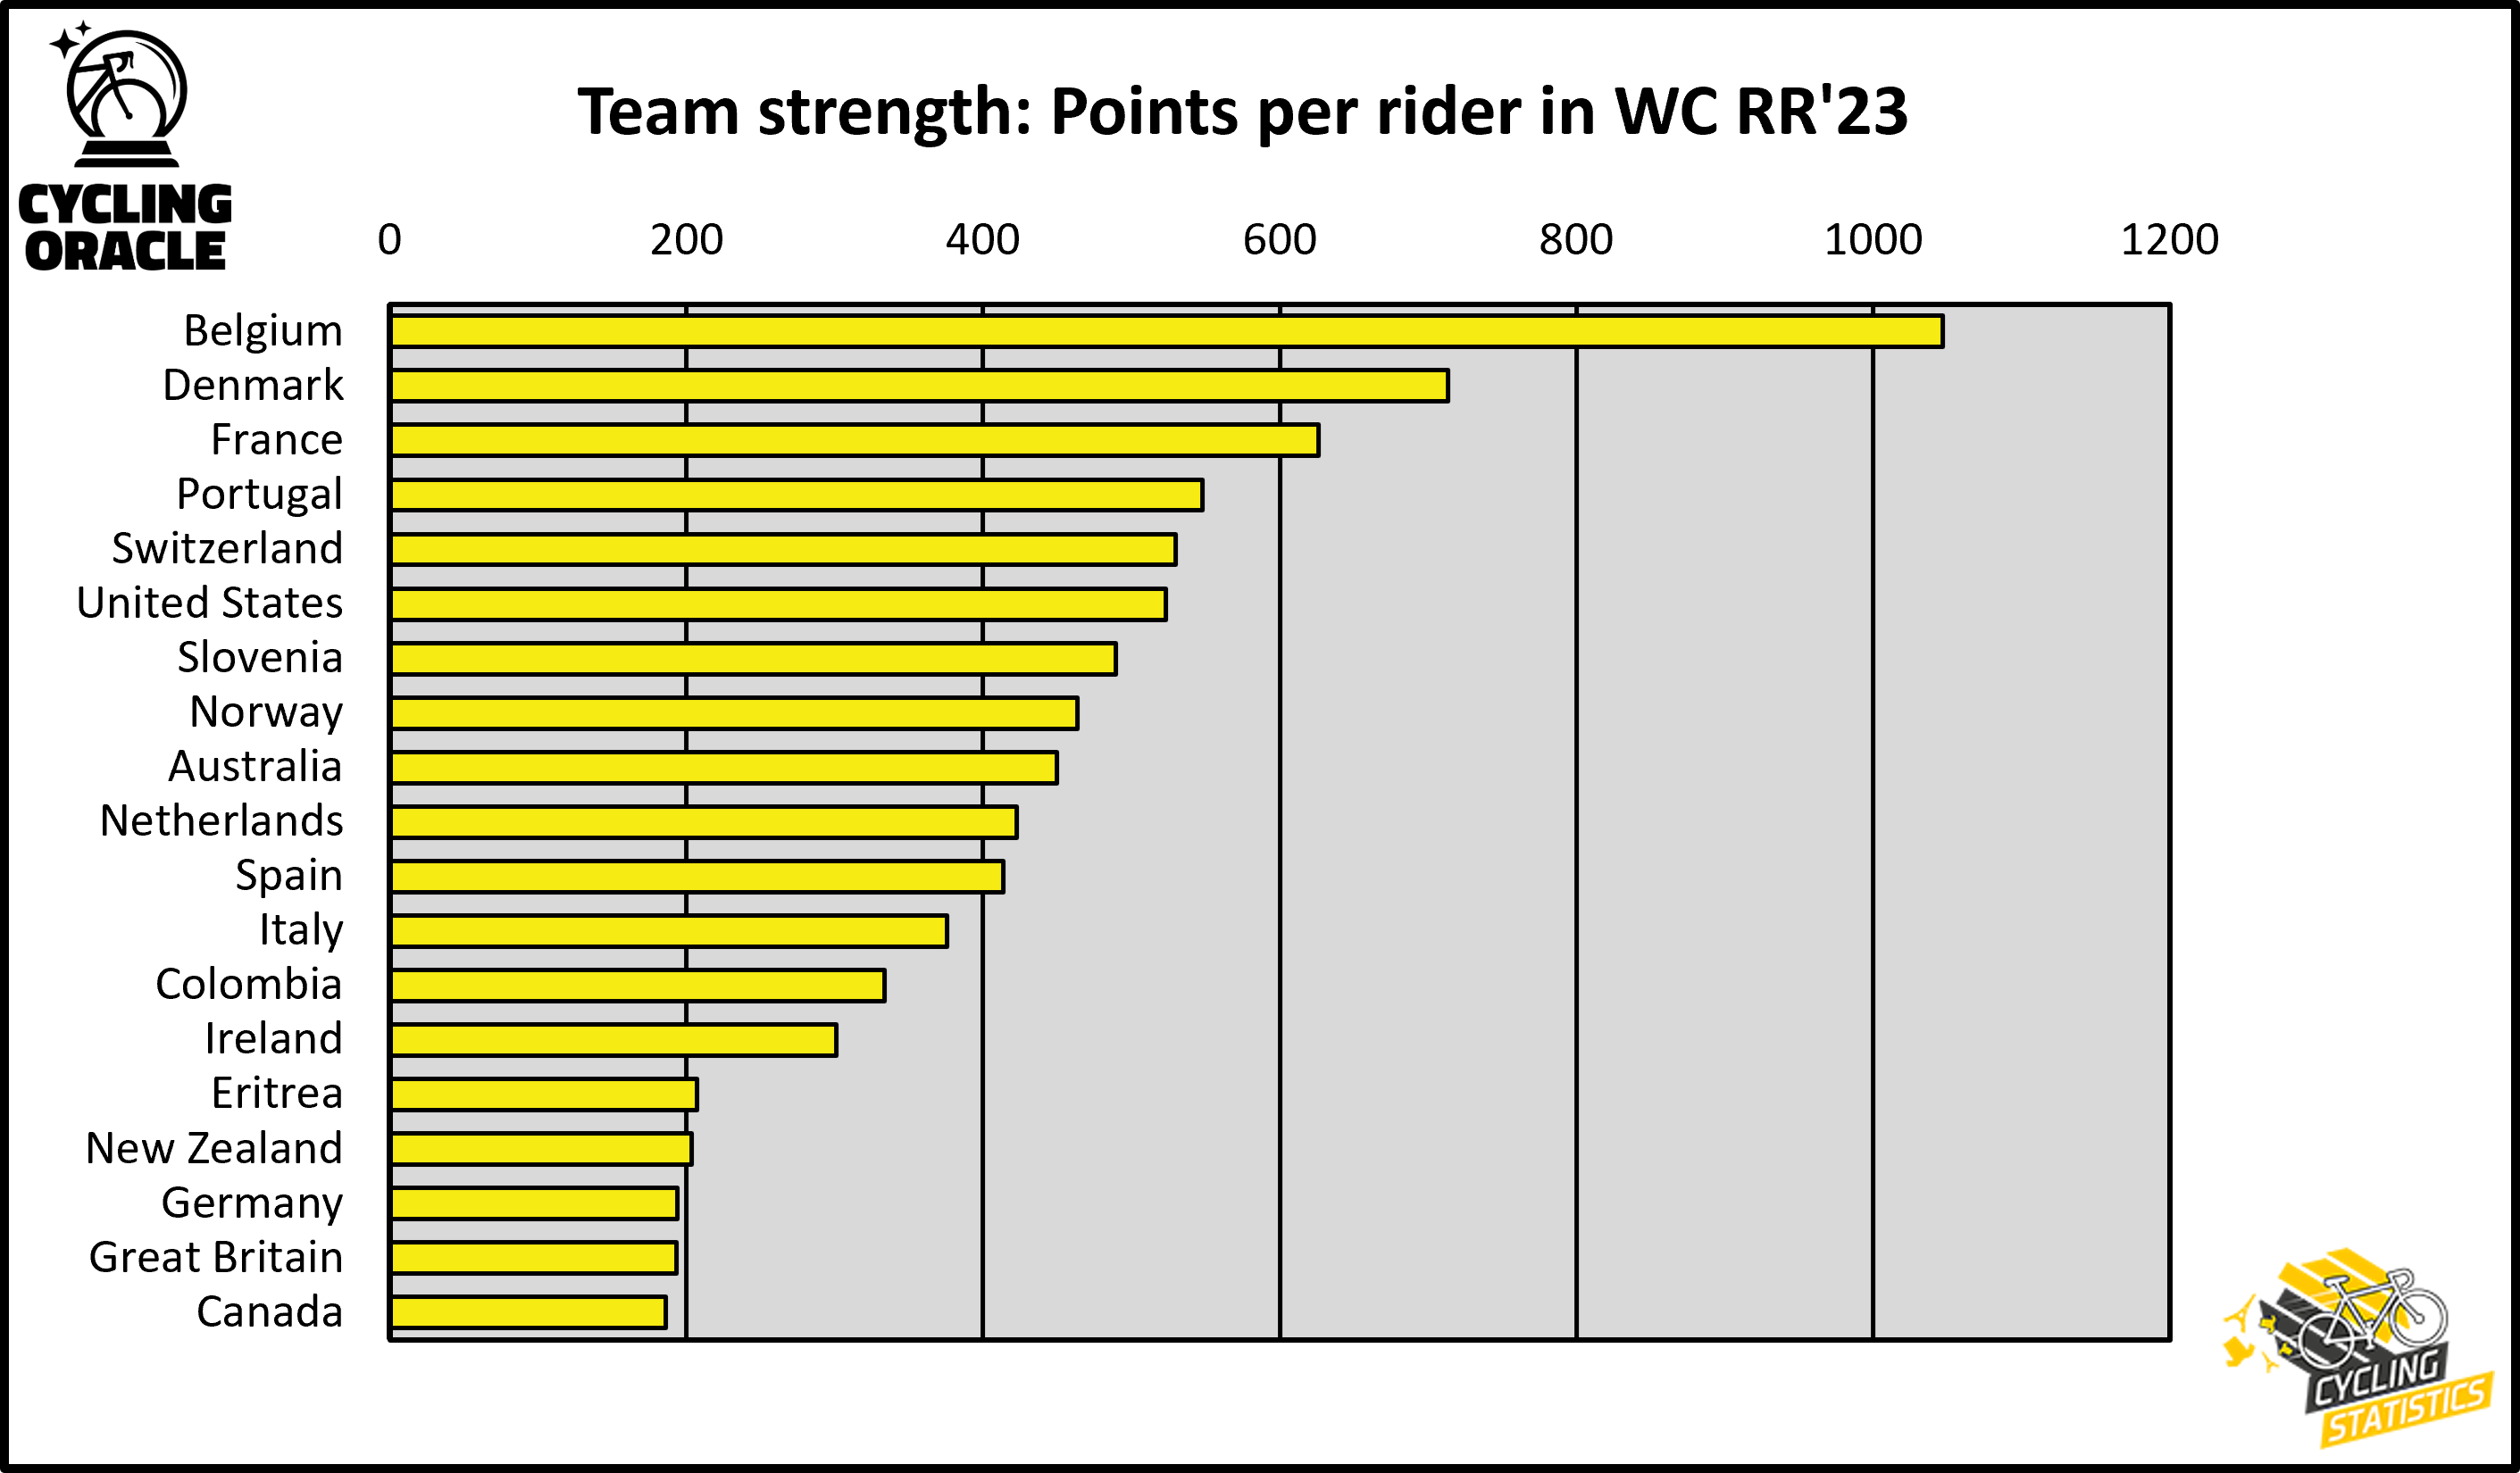 Strongest teams at WC RR 2023